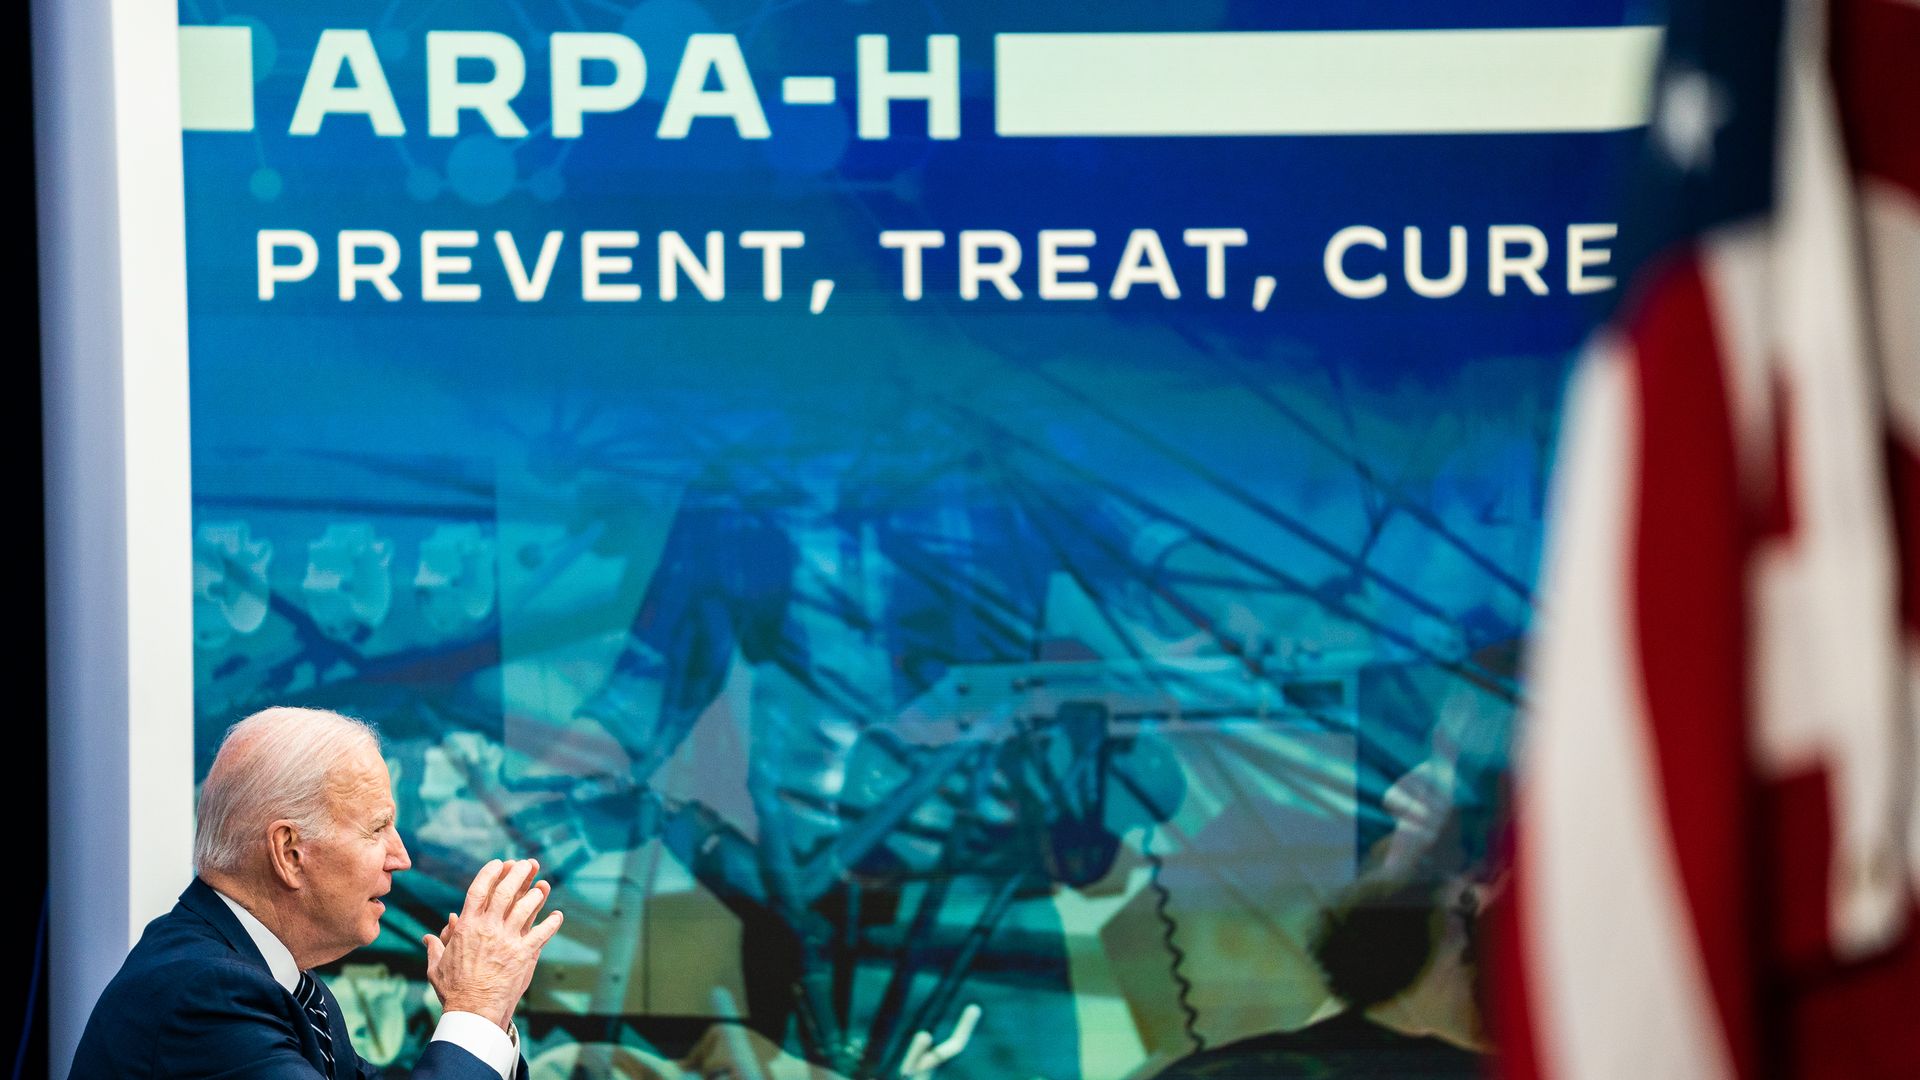 A white man with white hair sits in profile to the left in front of a blue screen that says ARPA-H: Prevent, Treat, Cure.